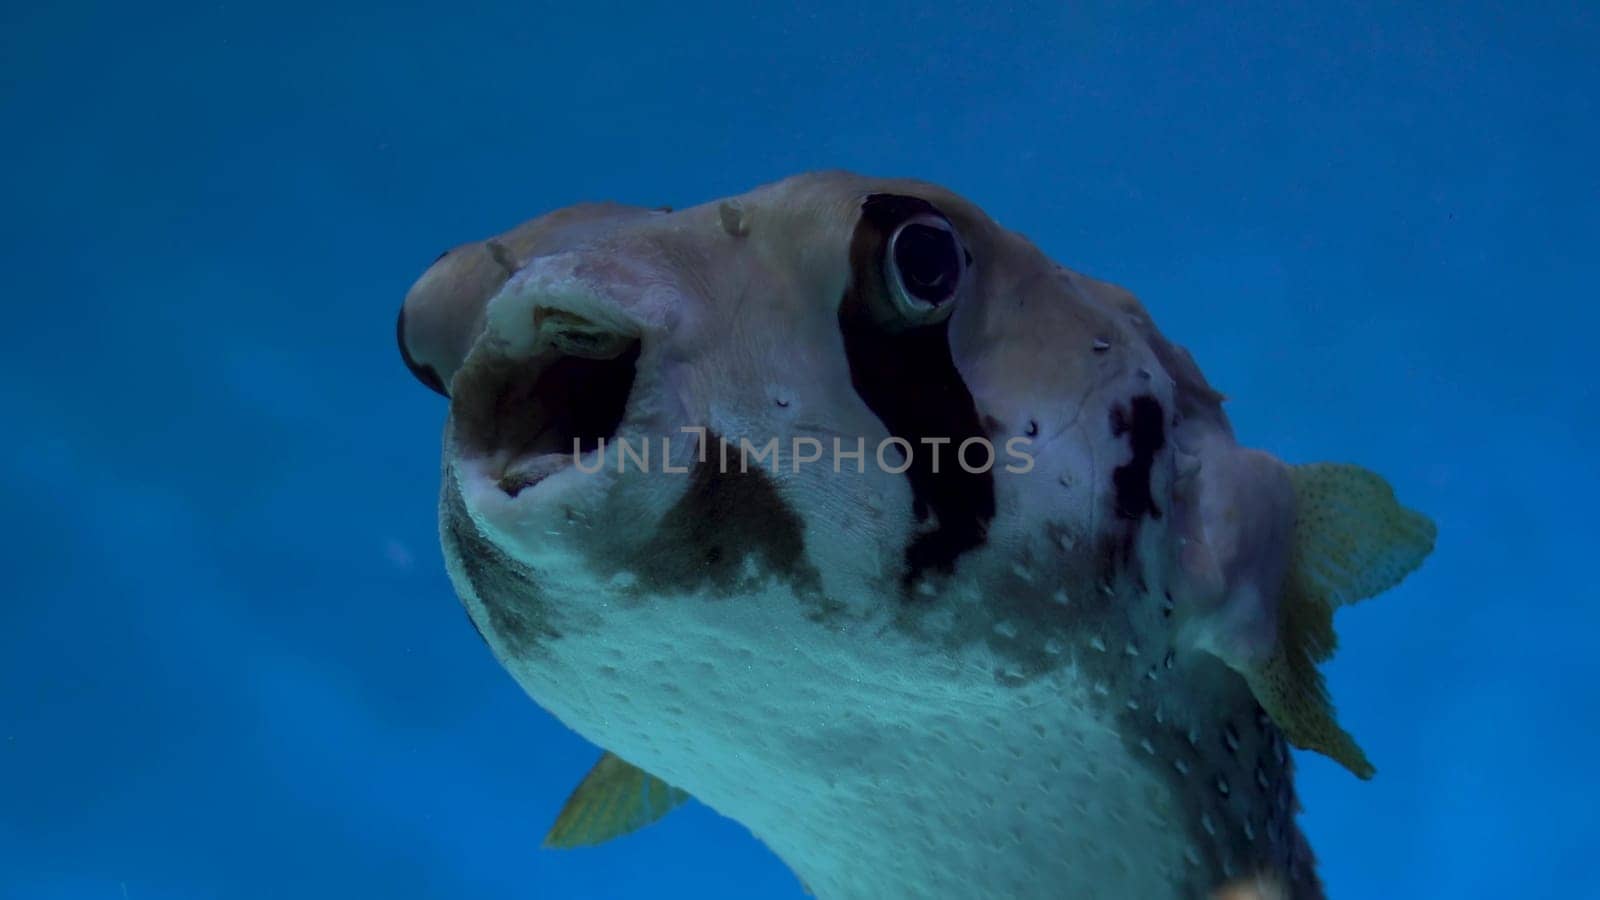 Puffer fish in the blue ocean underwater. Fish in the oceanarium on a blue background close-up. 4k